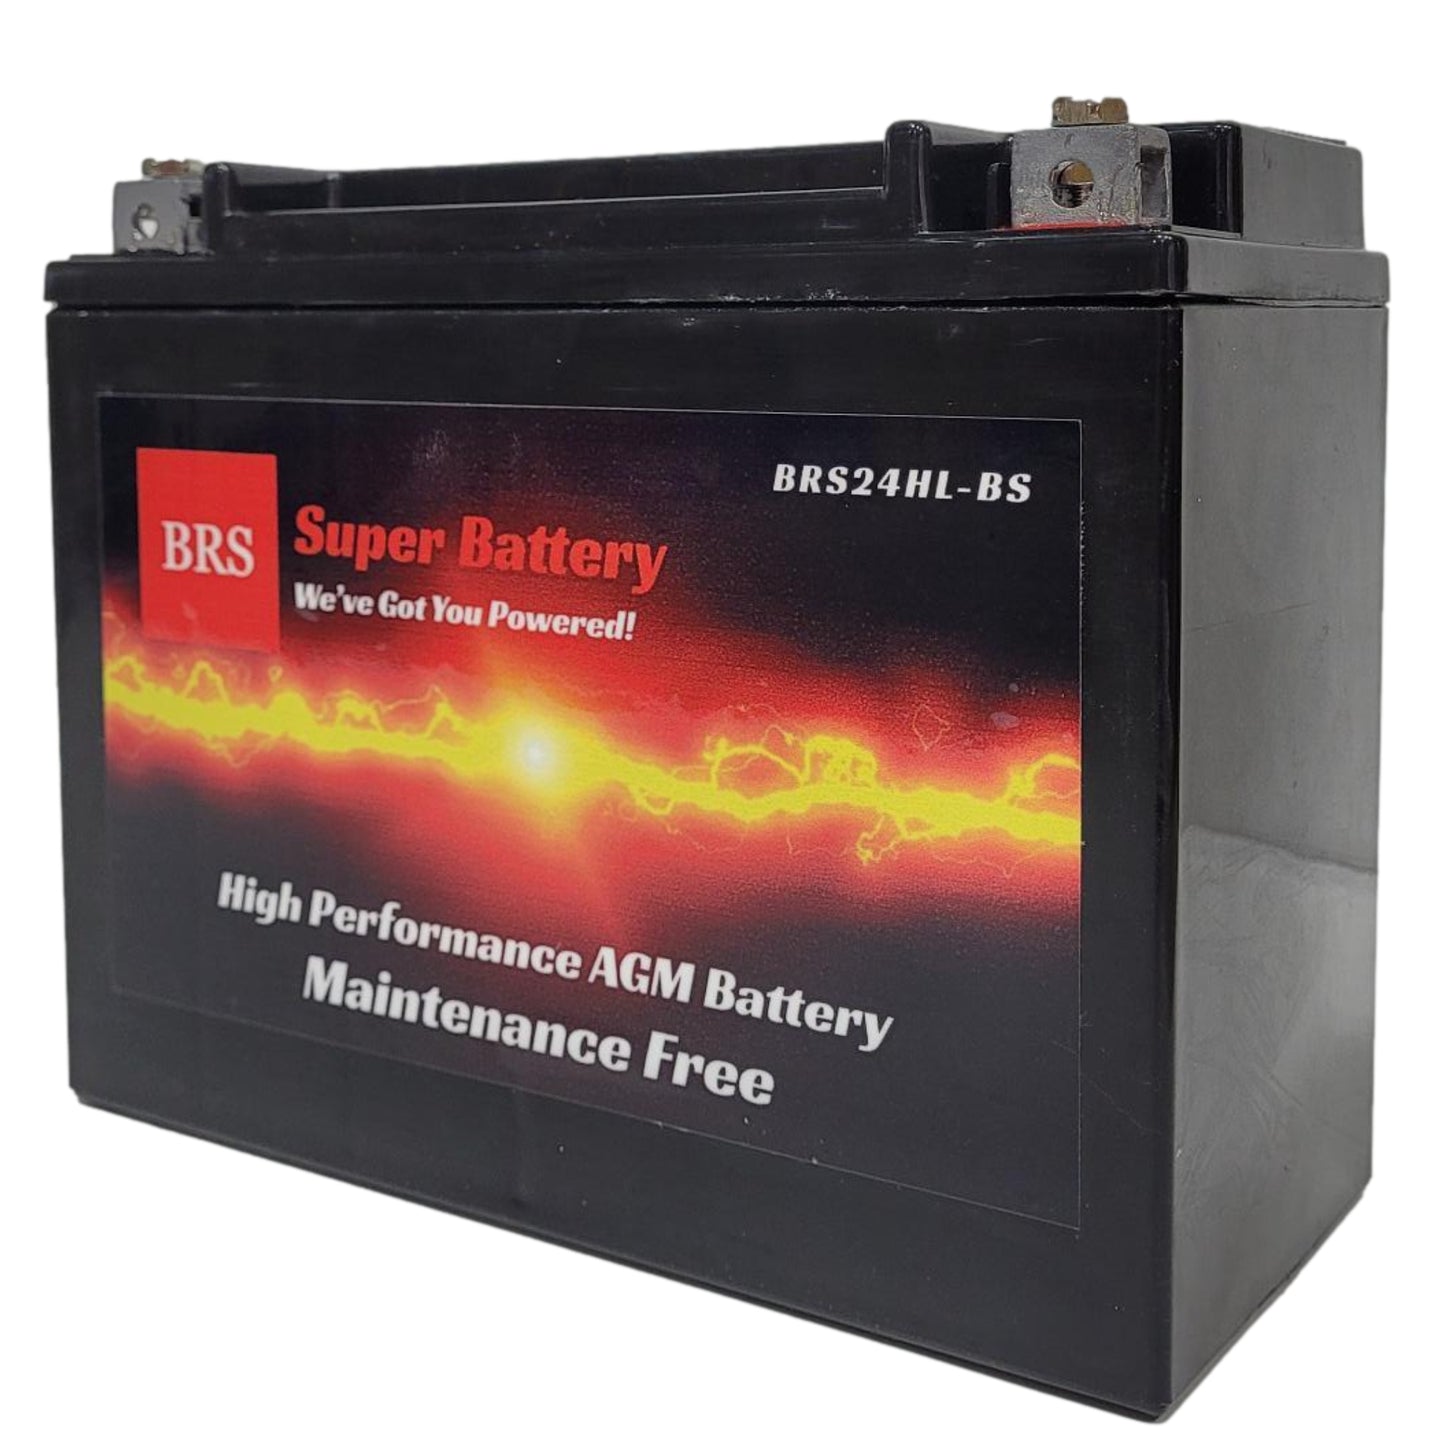 WPX24HL-BS 12v High Performance Sealed AGM PowerSport 10 Year Battery - BRS Super Battery